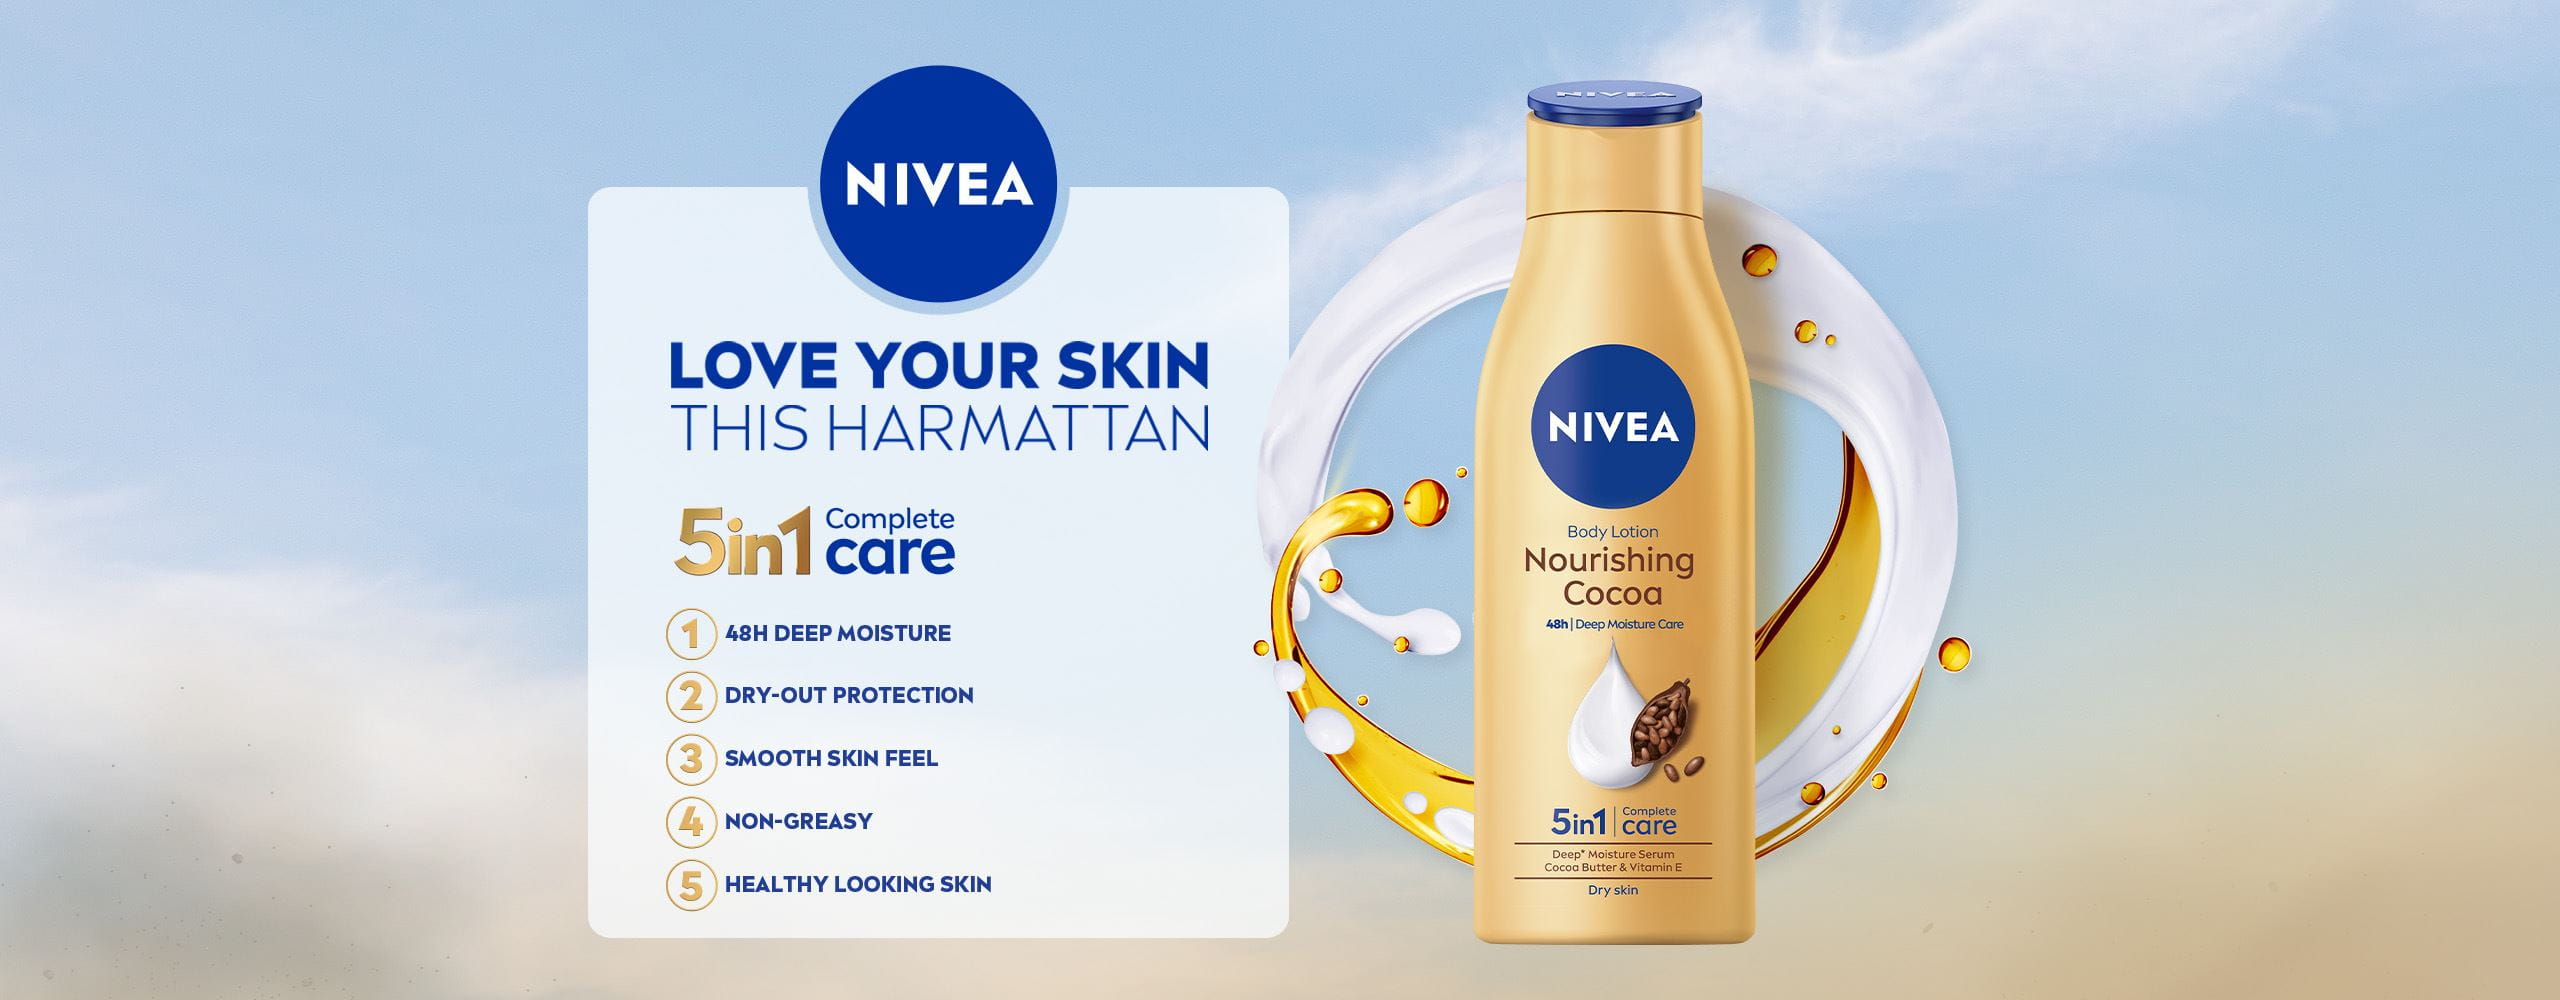 NIVEA Done with Dryness with Nourishing Cocoa